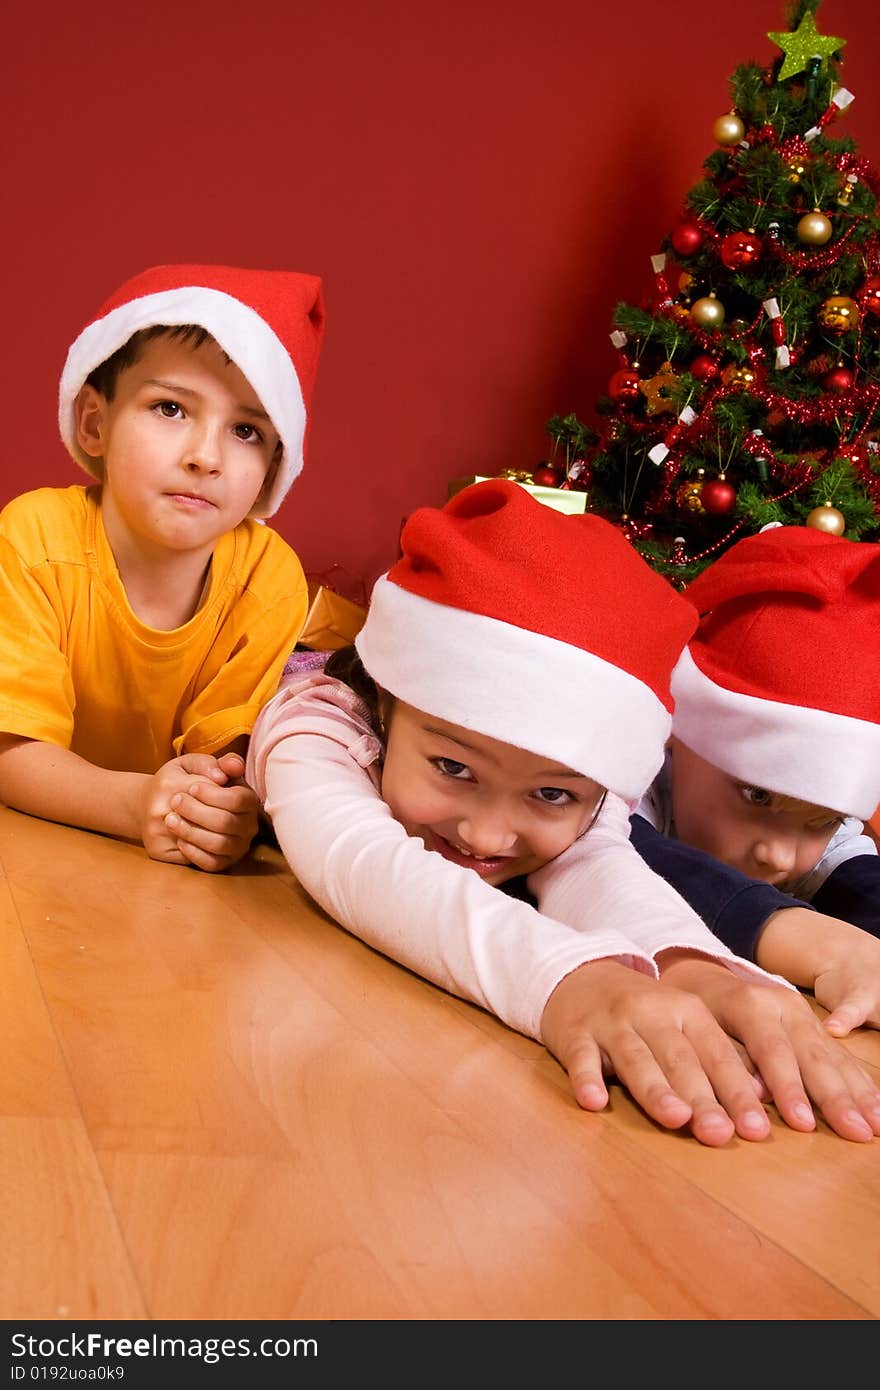 Little children as Santa in red cap laying on the floor with Christmas tree